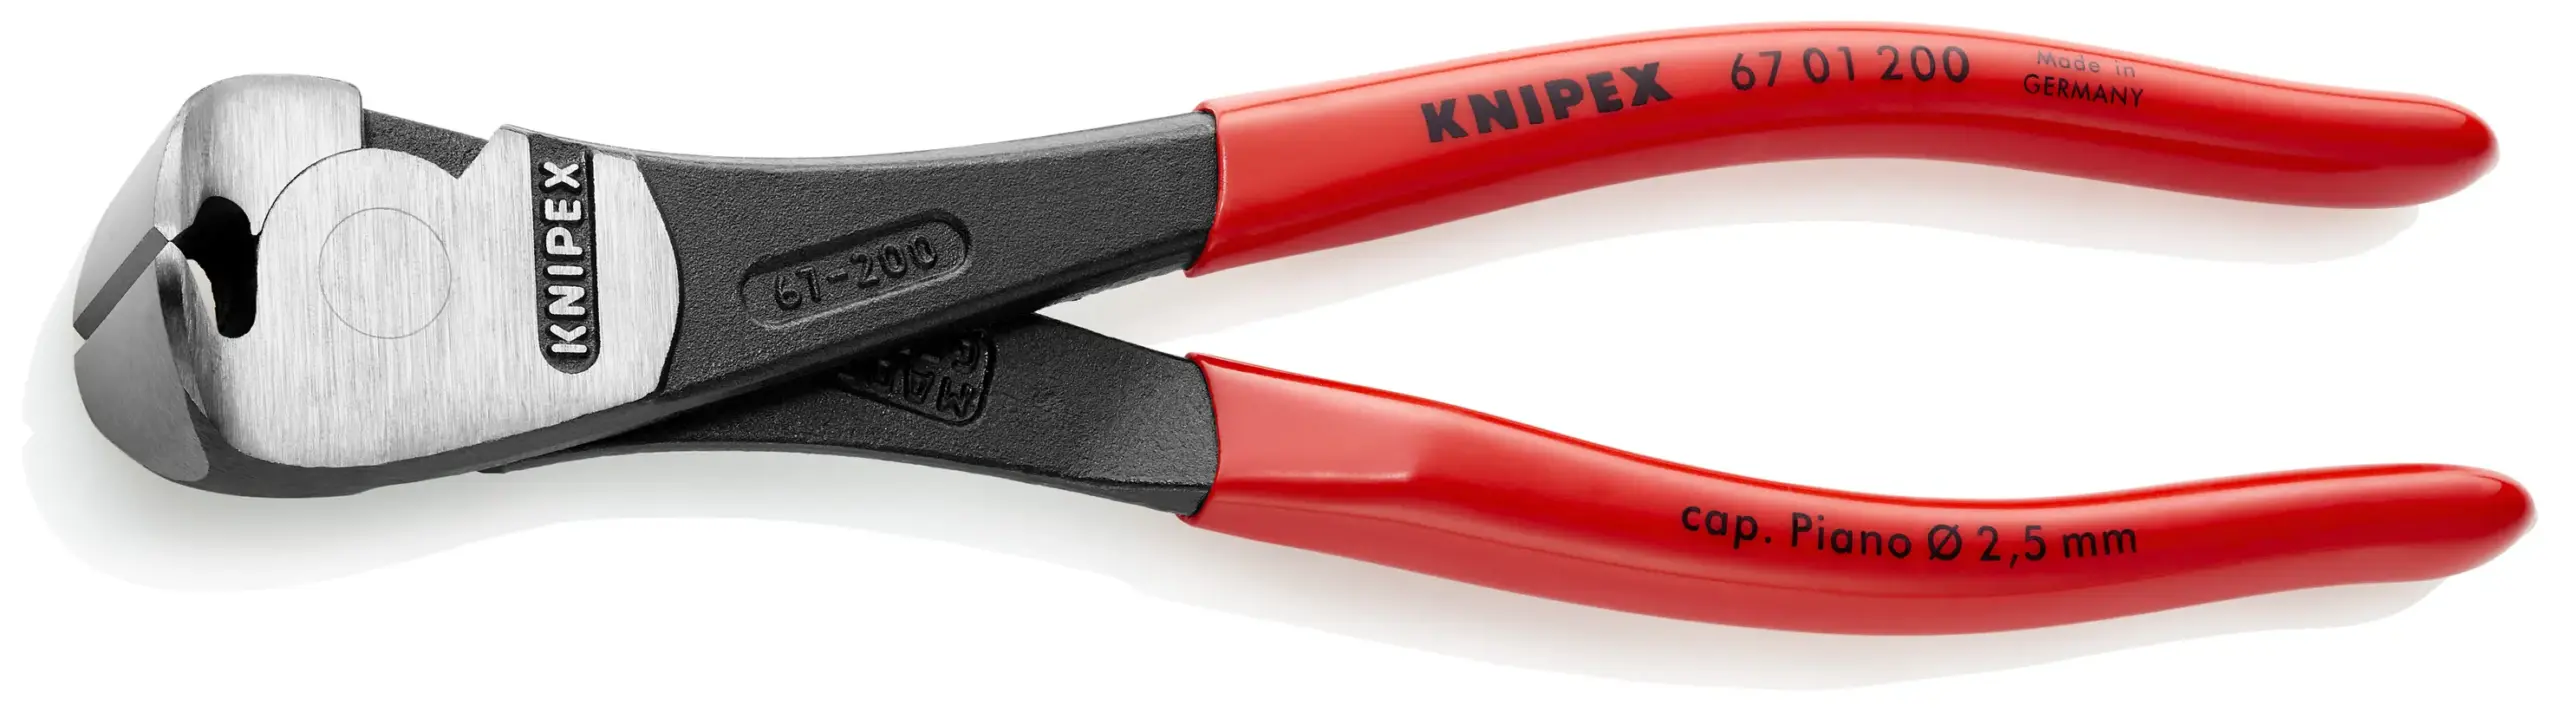 KNIPEX 67 01 200 8″ High Leverage End Cutting Nippers | Adam's